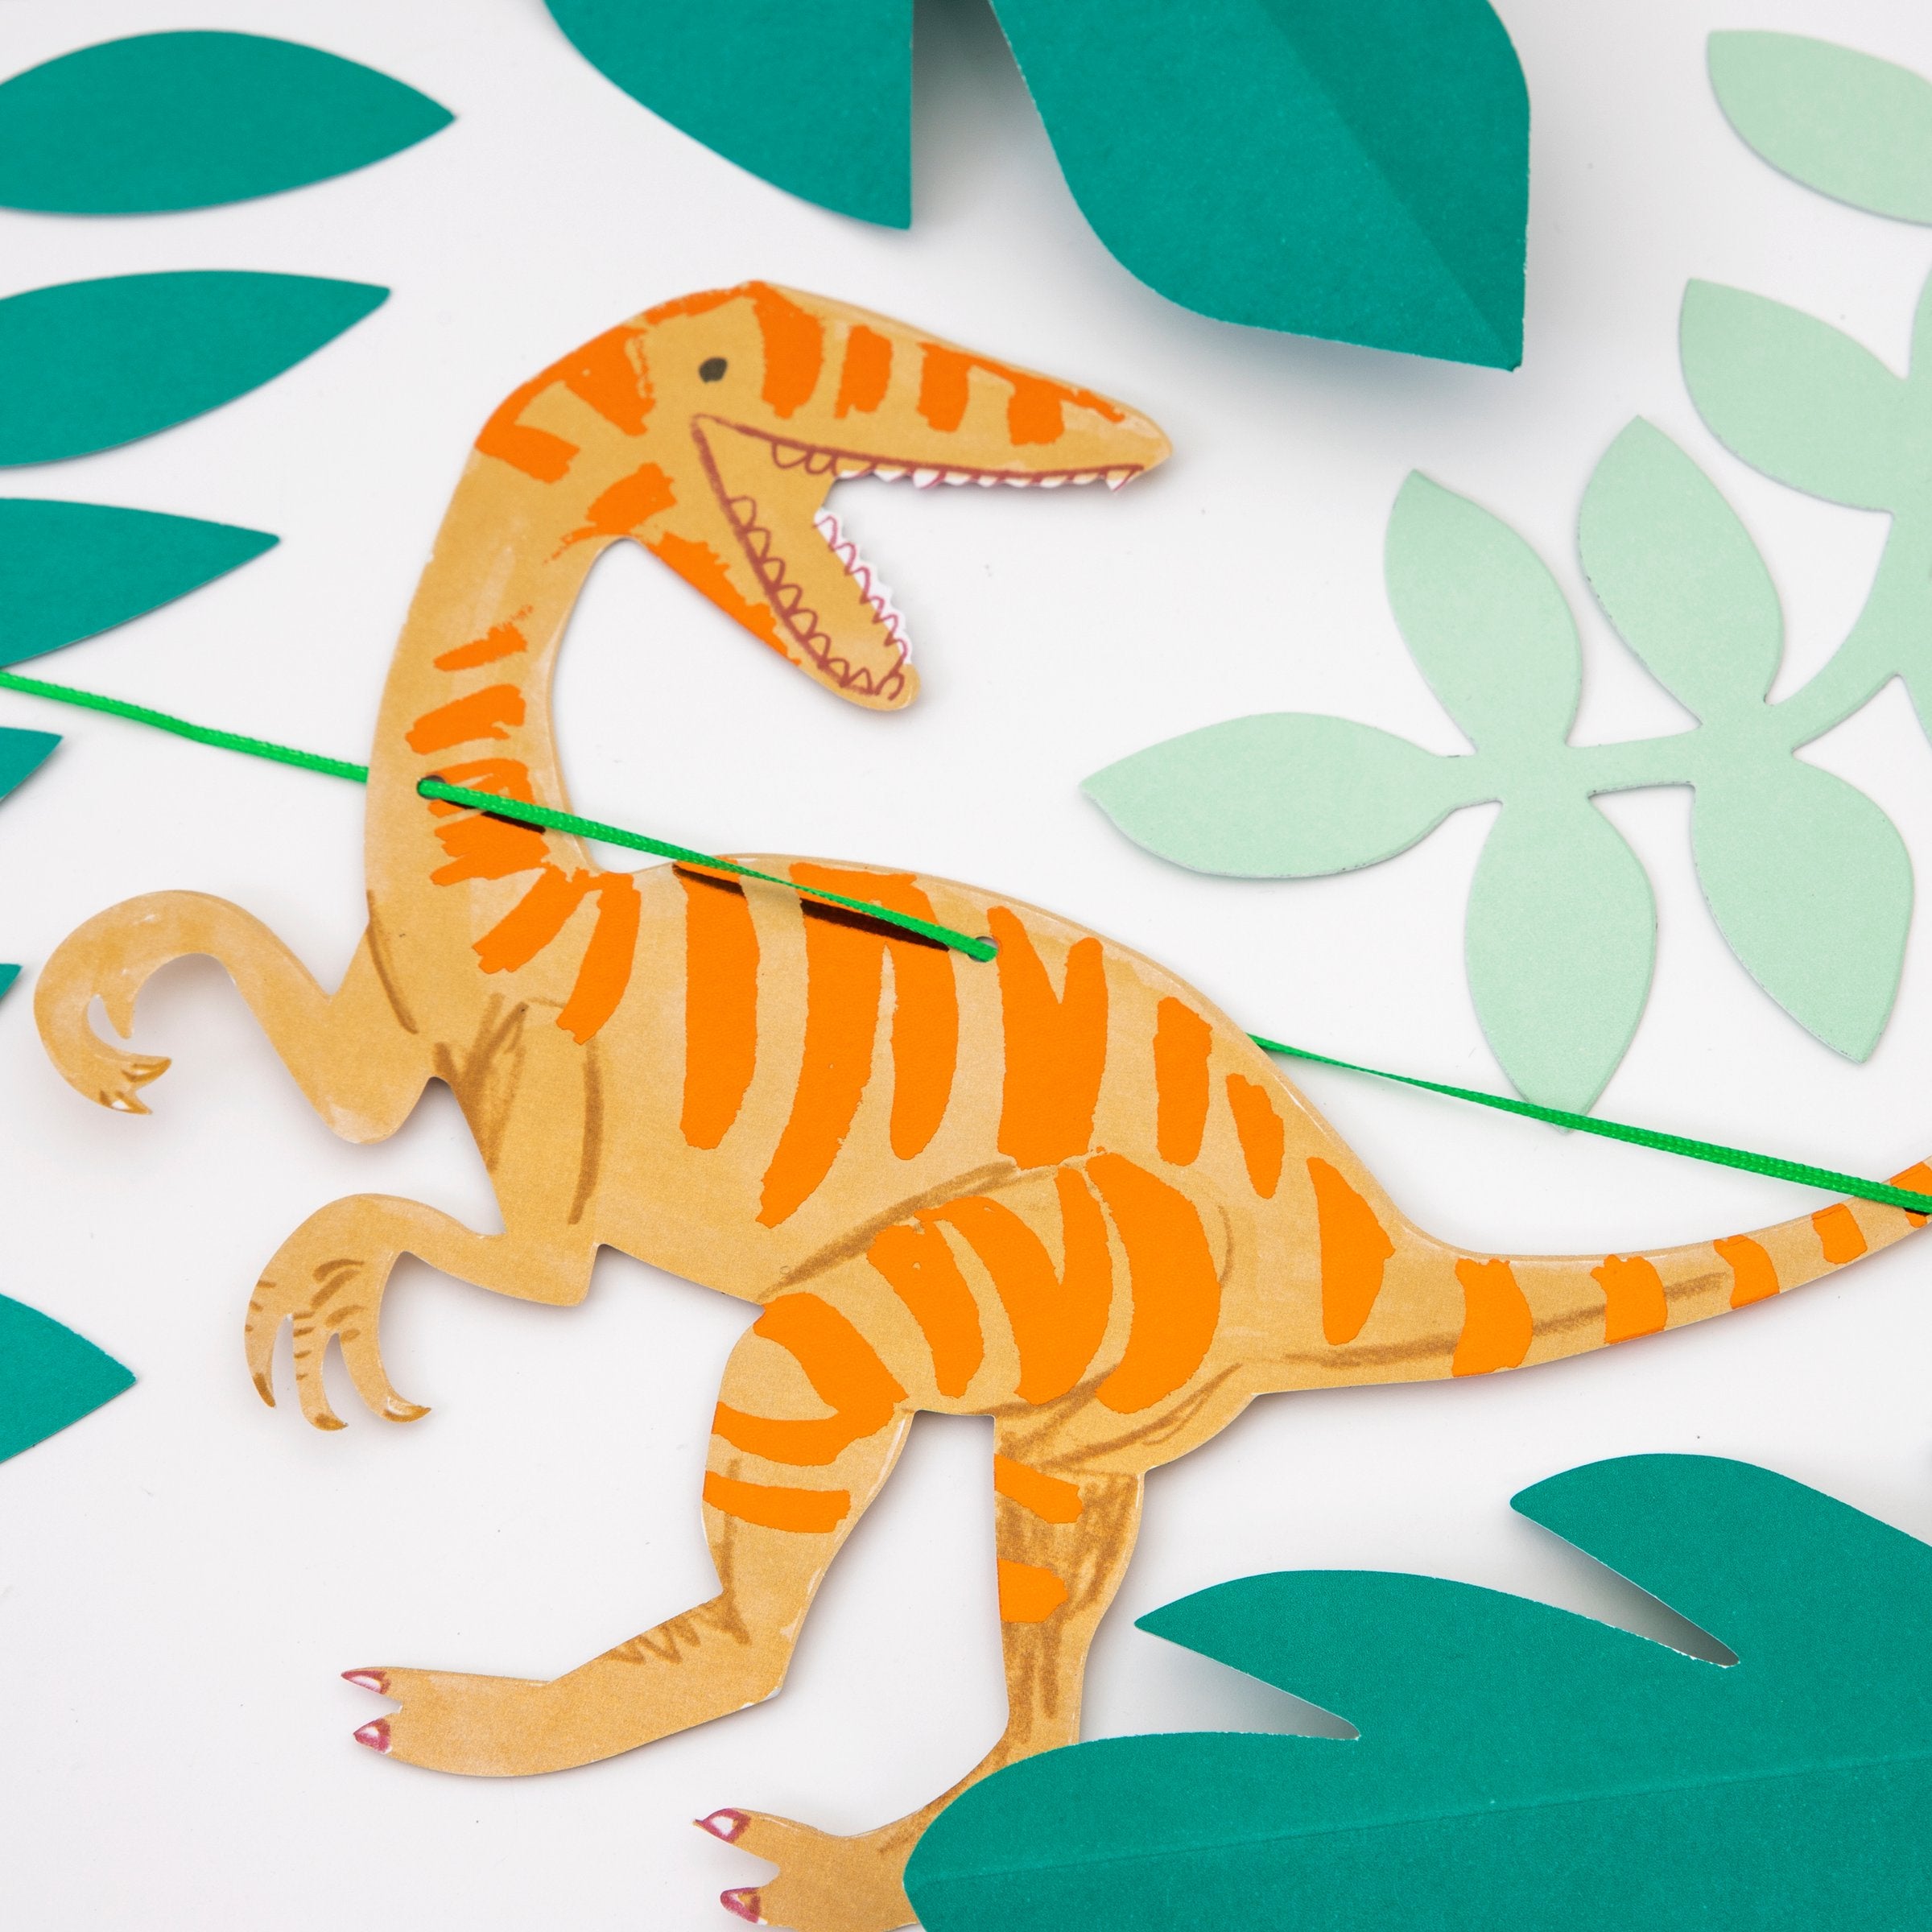 Get all the dinosaur party supplies you need for 8 guests in one box.